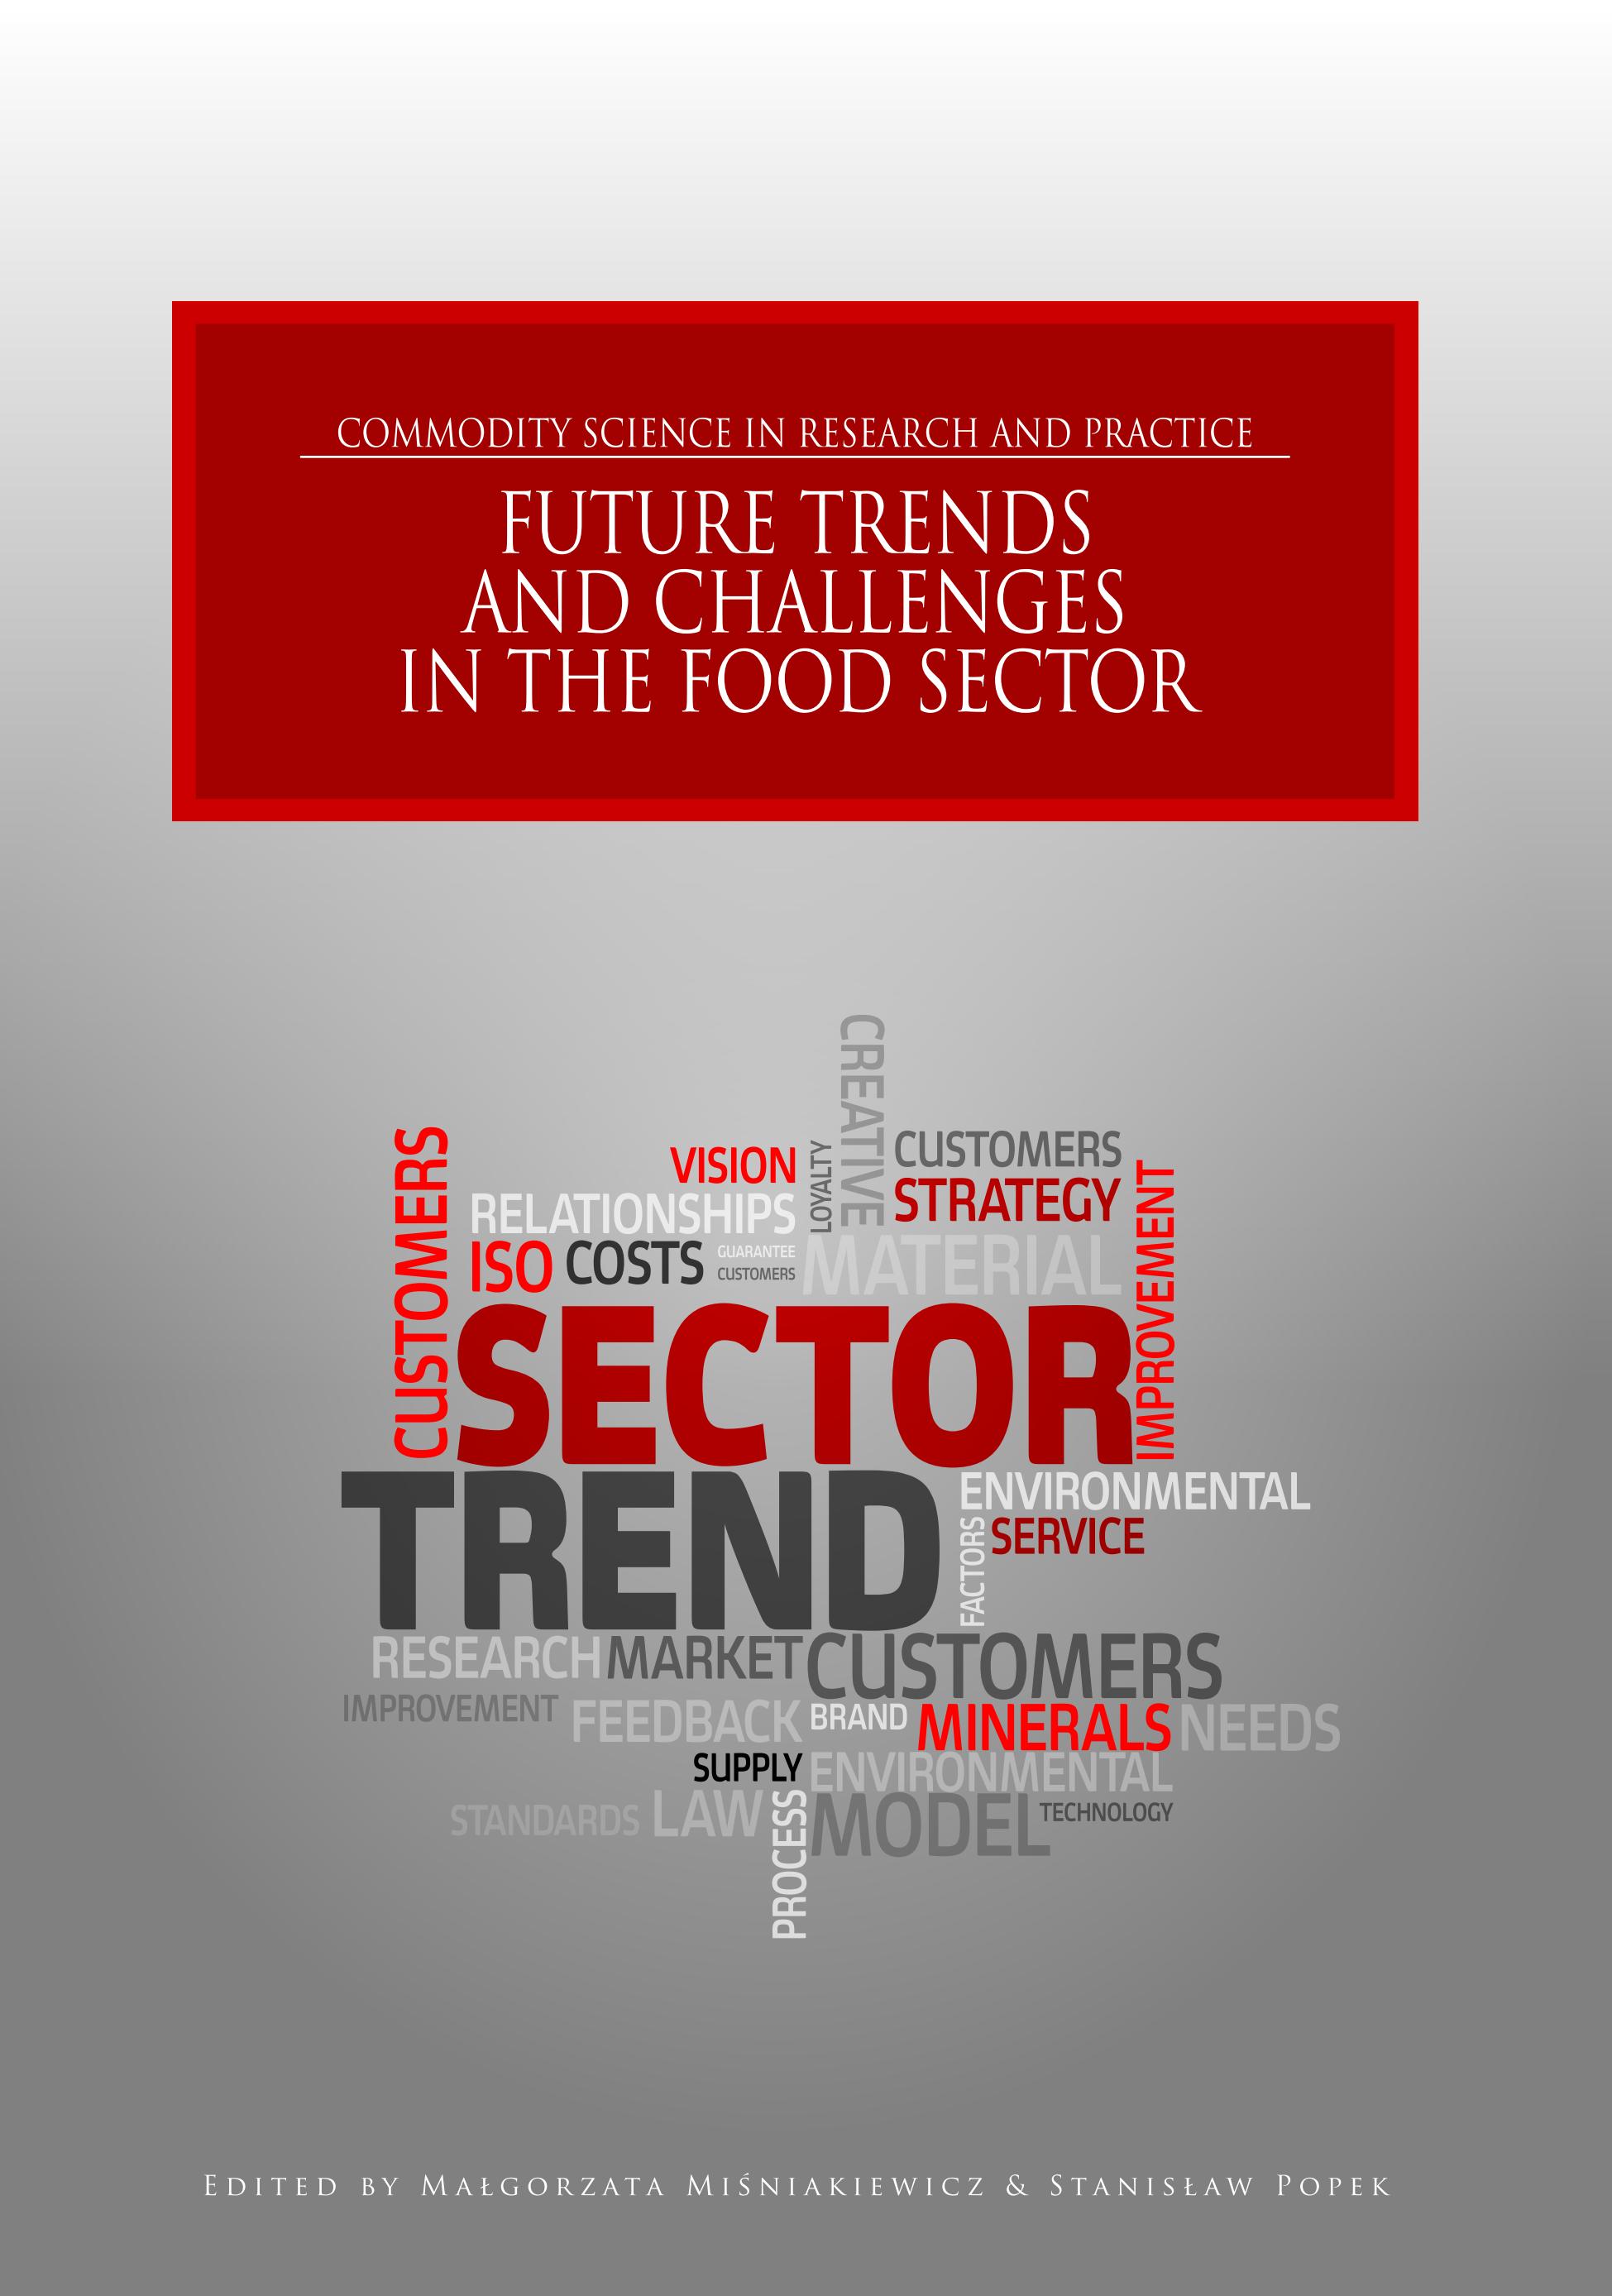 FUTURE_TRENDS_AND_CHALLENGES_IN_THE_FOOD_SECTOR_ed_by_Misniakiewicz&Popek_01